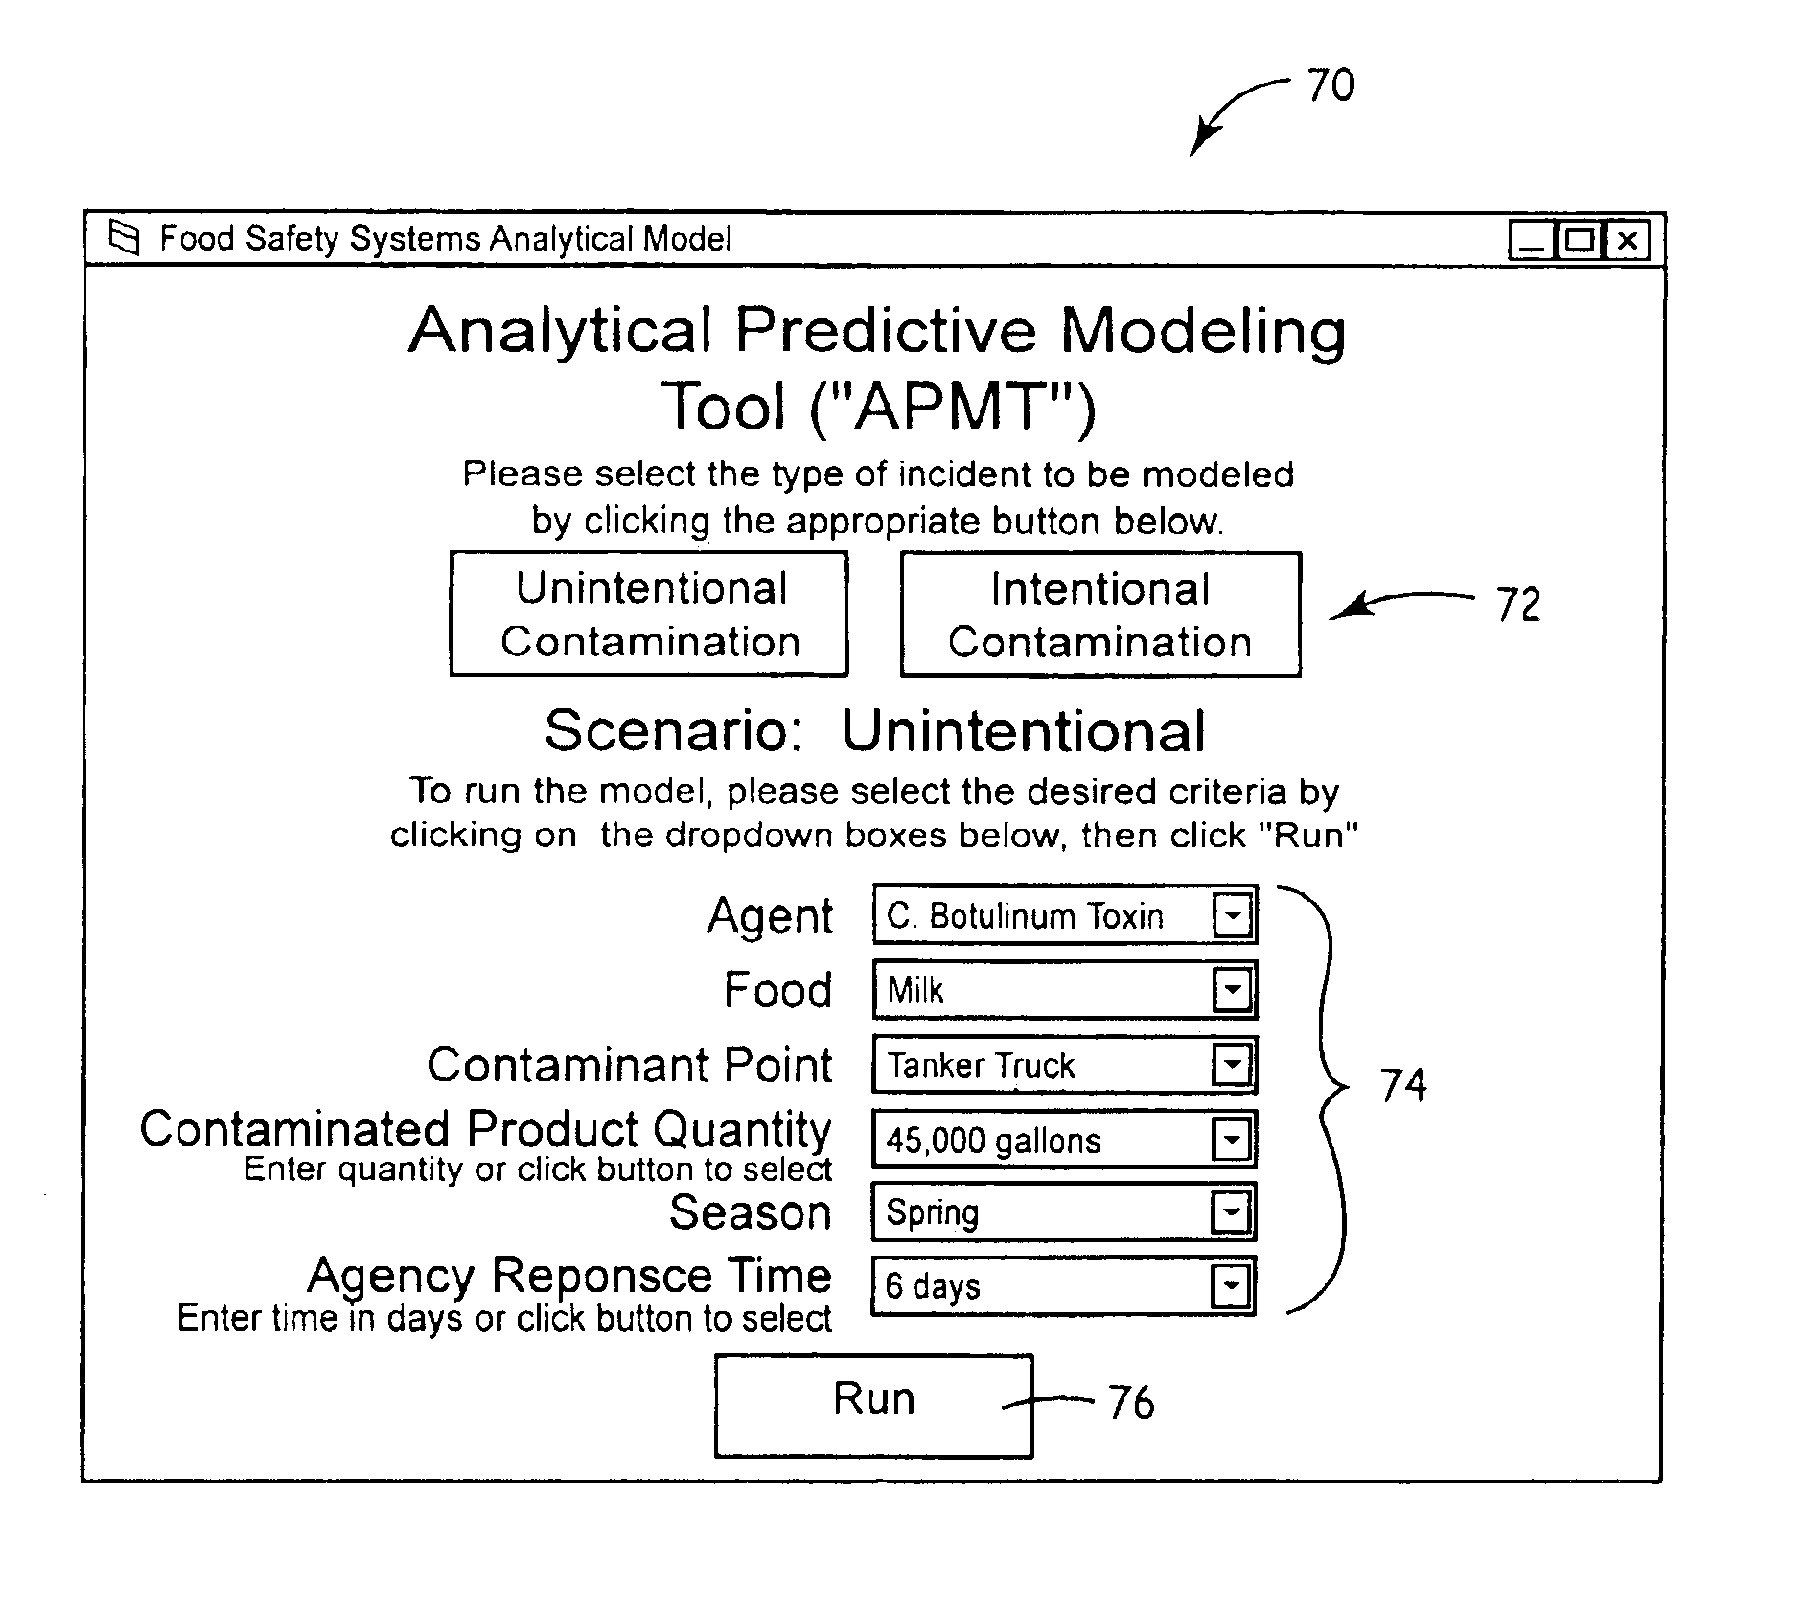 System and method for identifying a food event, tracking the food product, and assessing risks and costs associated with intervention